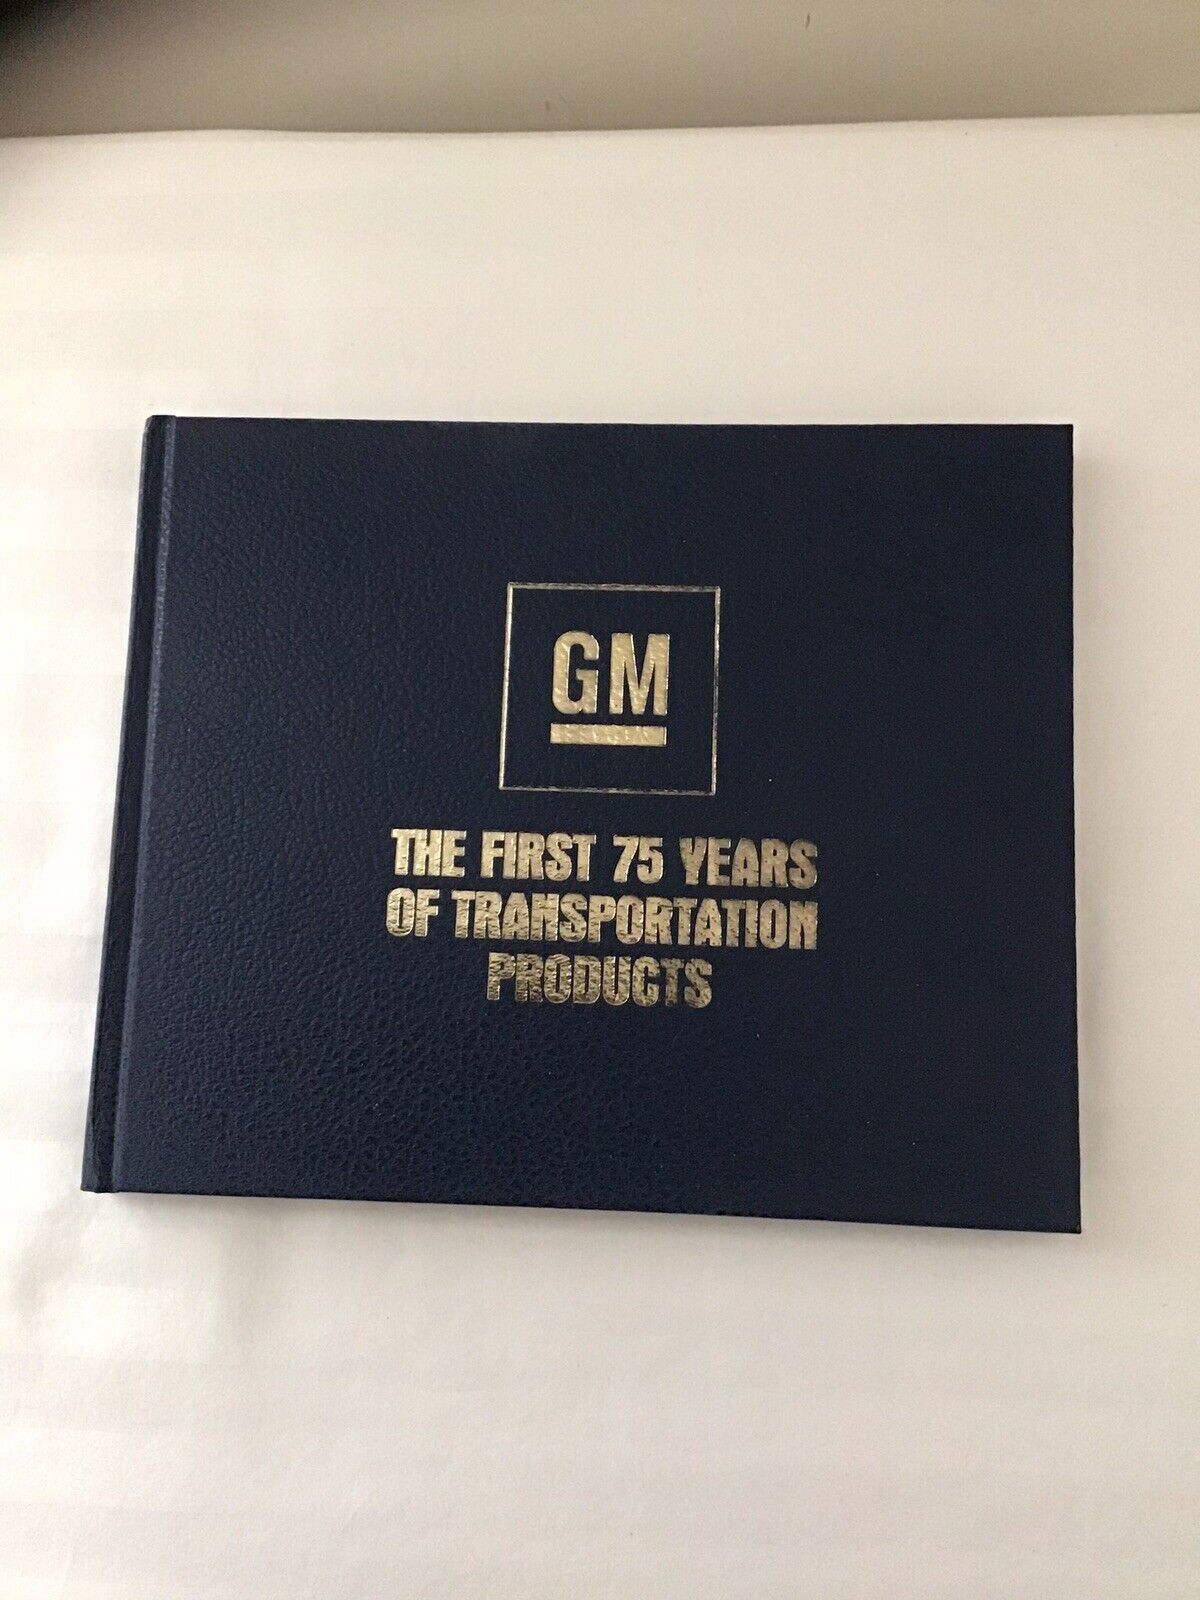 GM 75th ANNIVERSARY BOOK The First 75 Years of Transportation Products